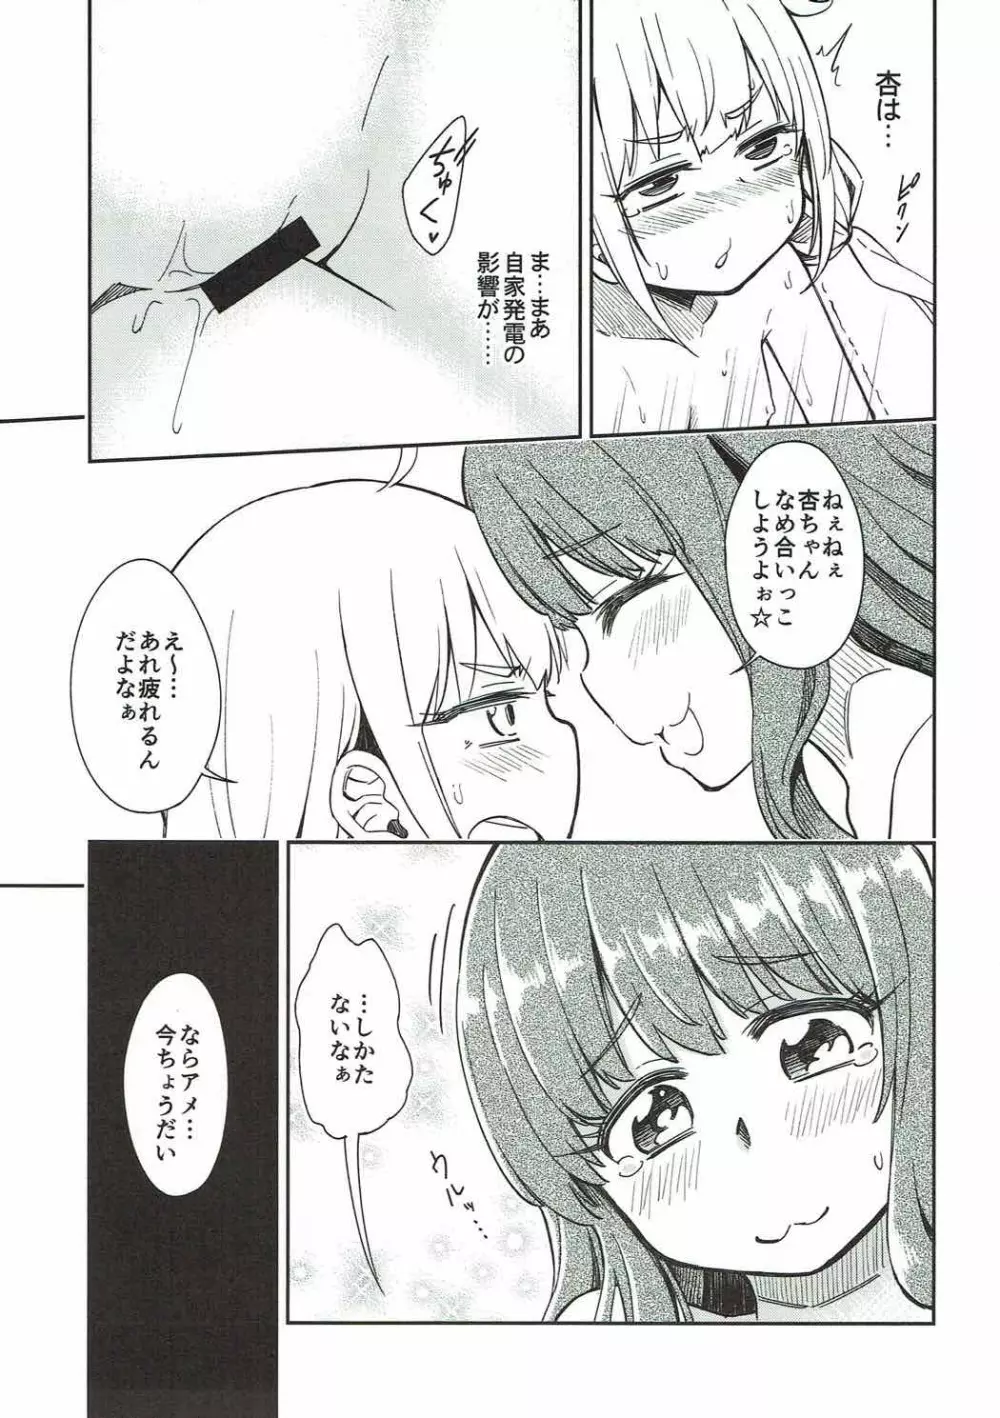 Lovely Girls' Lily vol.16 - page14